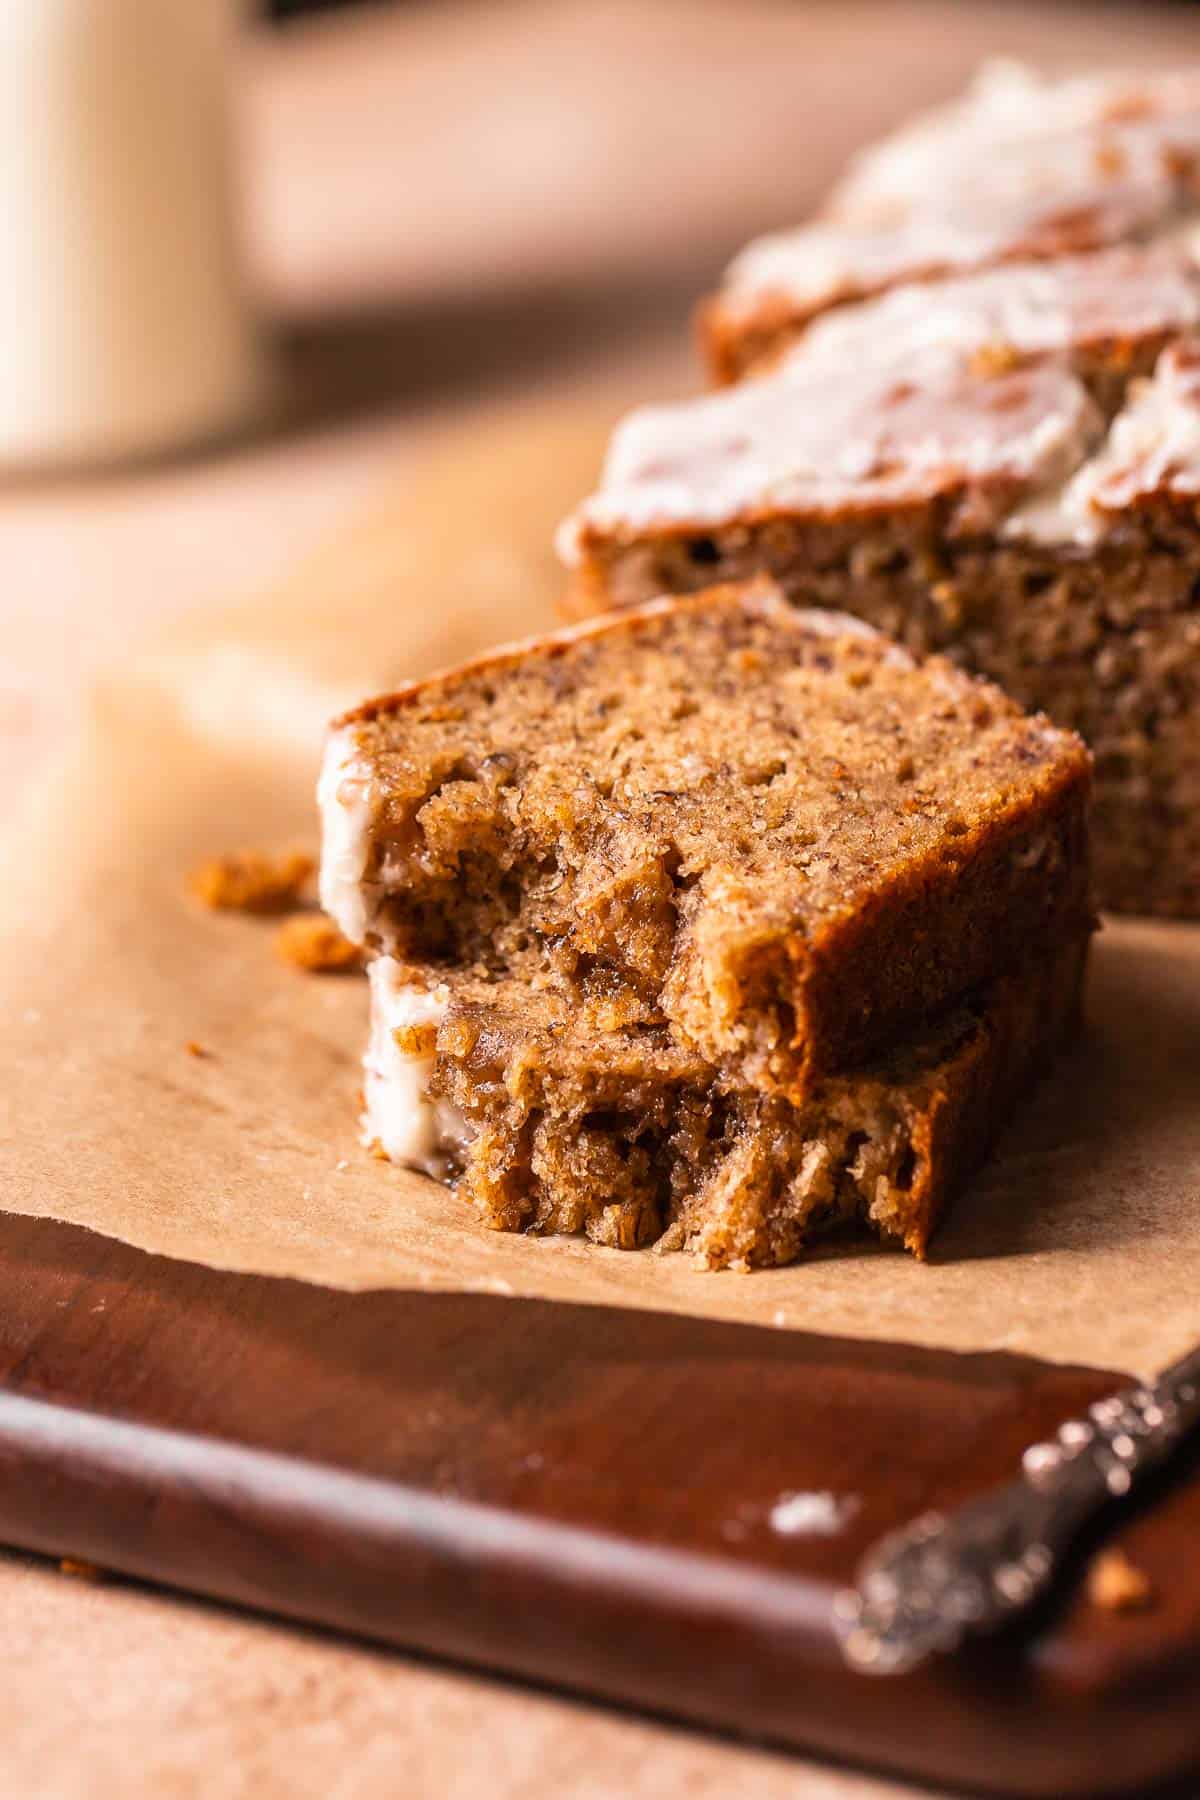 A slice of banana bread broken in half to show the moist and tender texture.